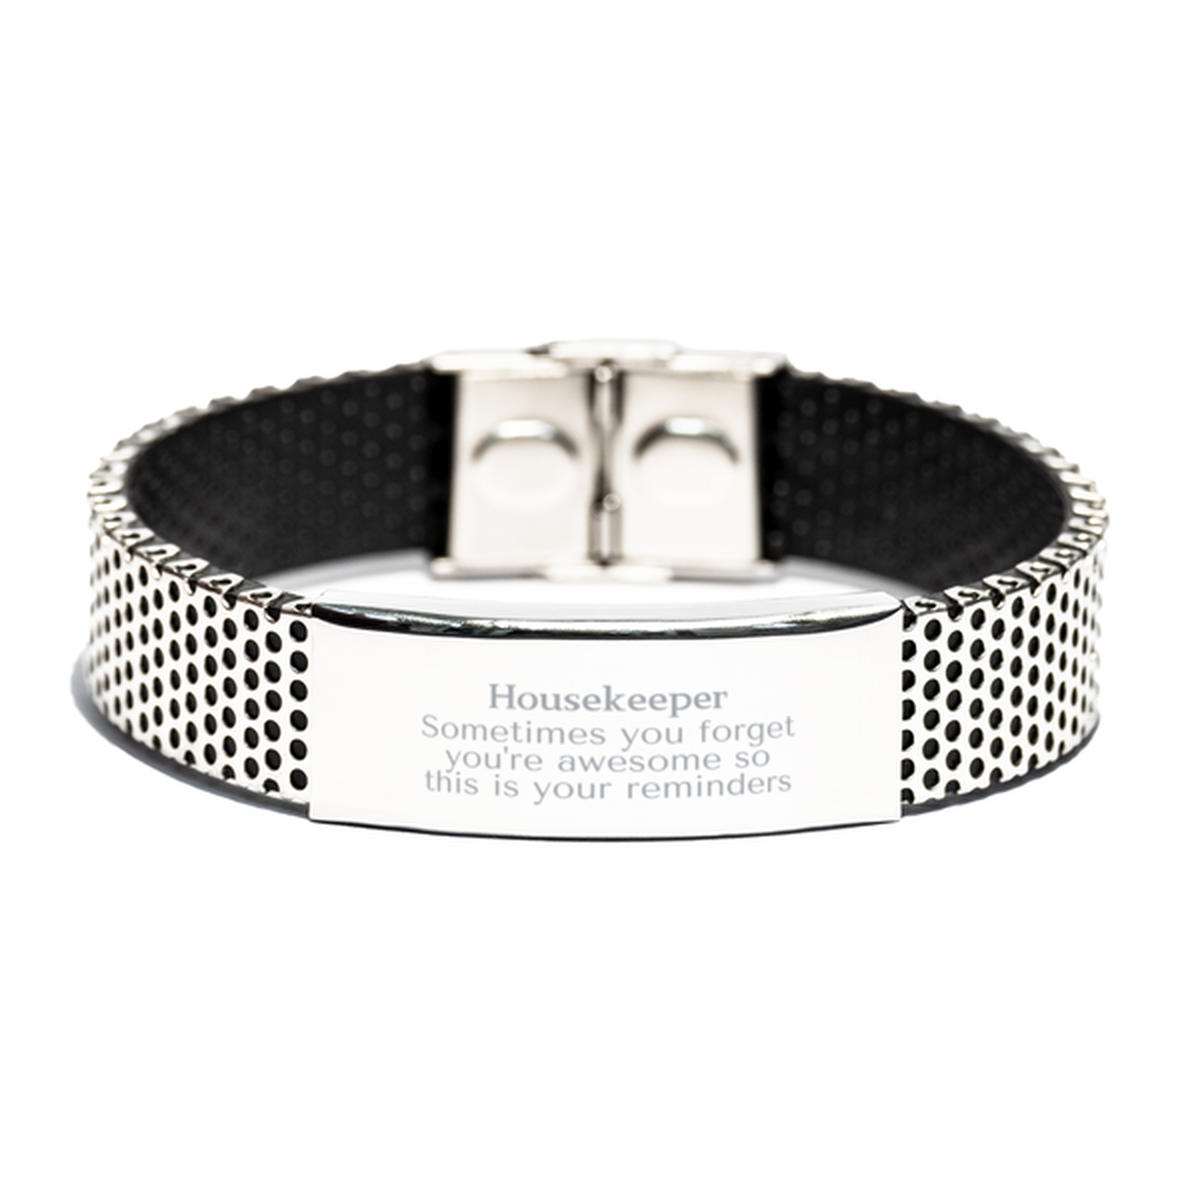 Sentimental Housekeeper Stainless Steel Bracelet, Housekeeper Sometimes you forget you're awesome so this is your reminders, Graduation Christmas Birthday Gifts for Housekeeper, Men, Women, Coworkers